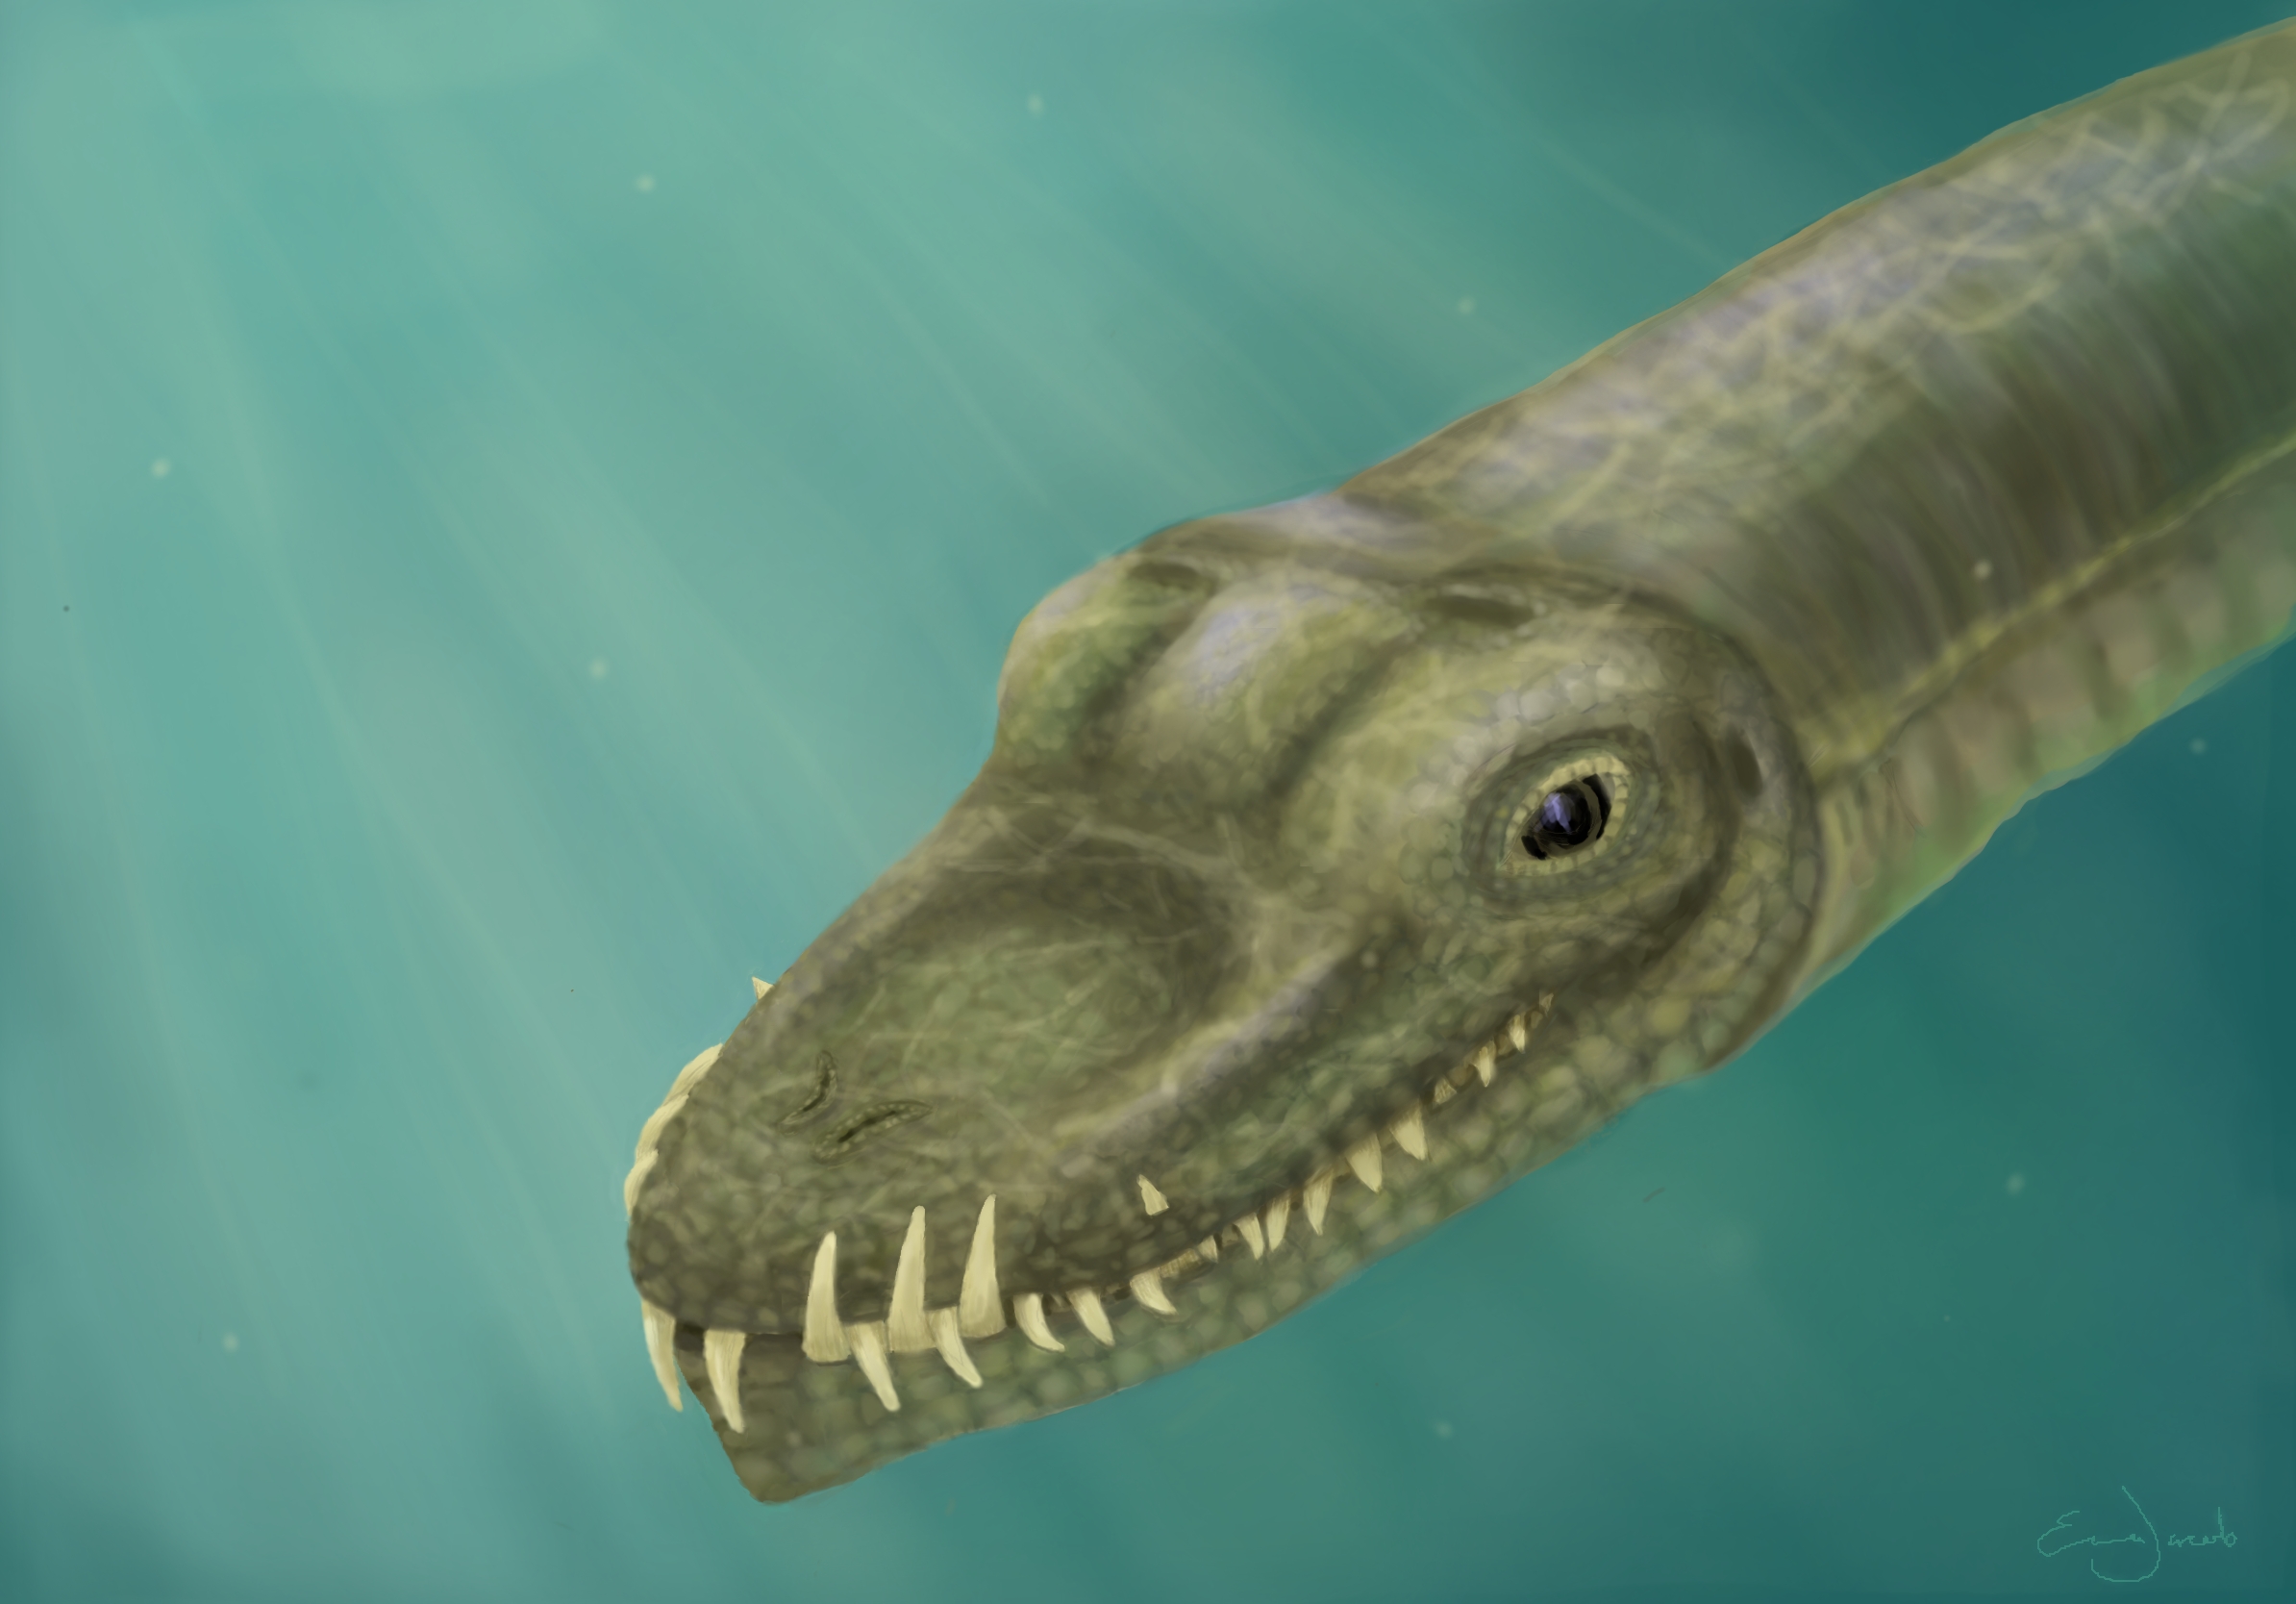 Tanystropheus's nostrils located on the top of the snout and curved teeth were adapted for catching slippery prey